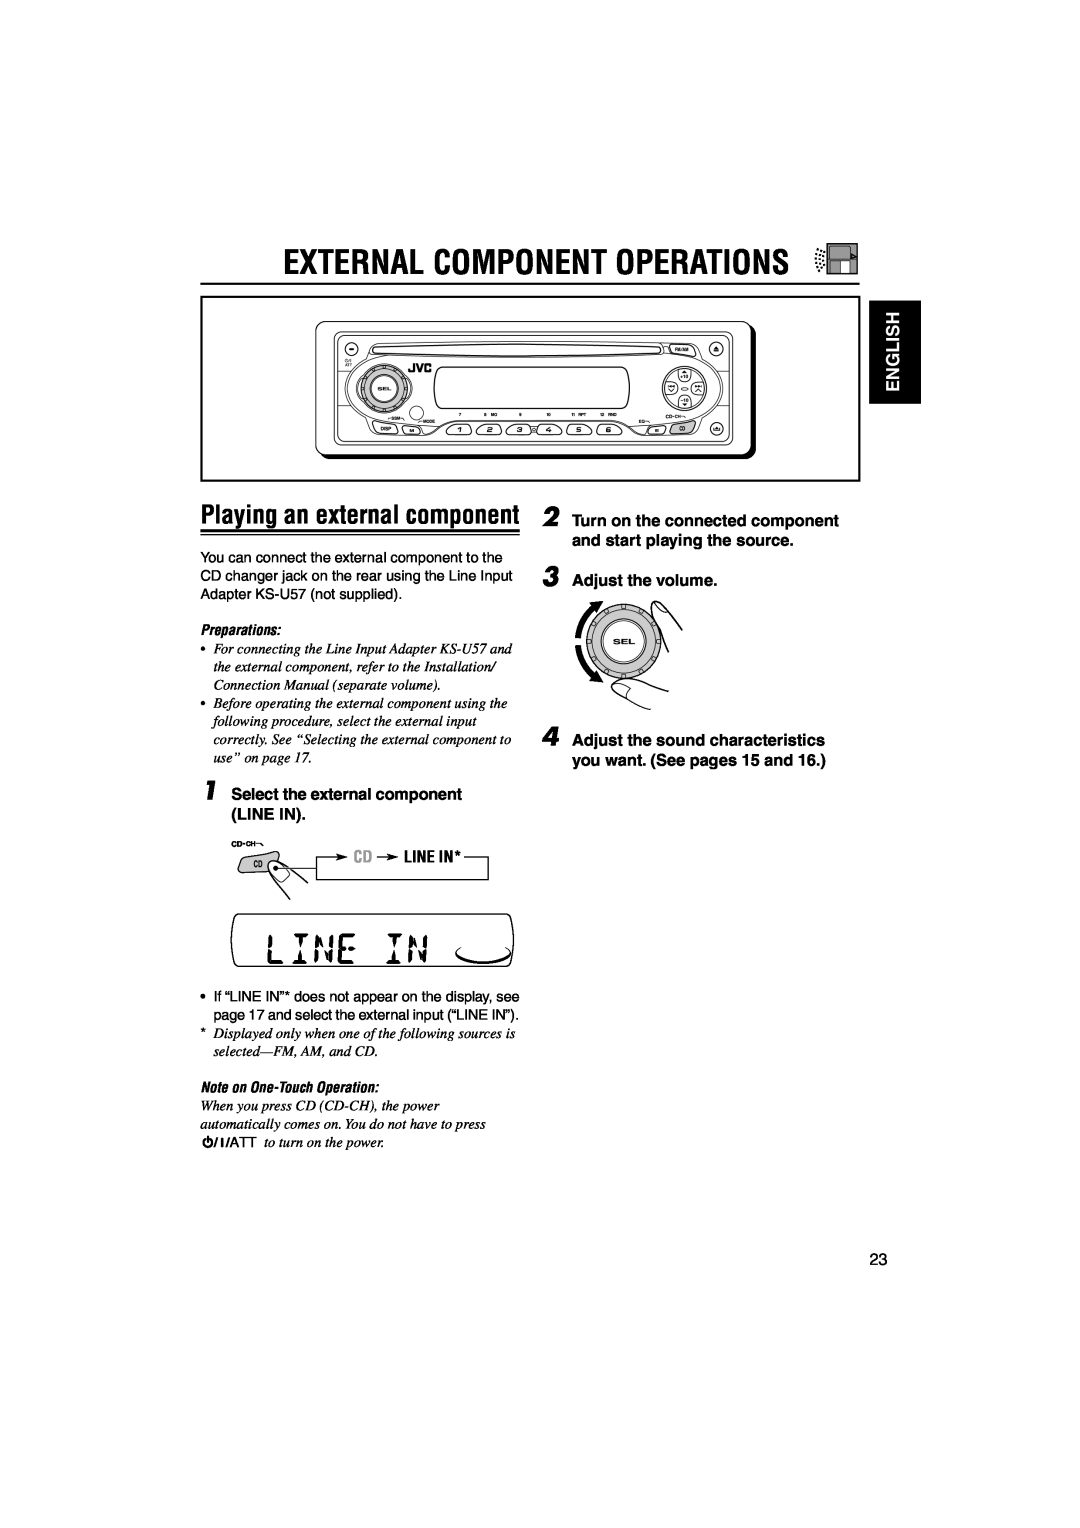 JVC KD-SX695 External Component Operations, Playing an external component, English, Select the external component LINE IN 